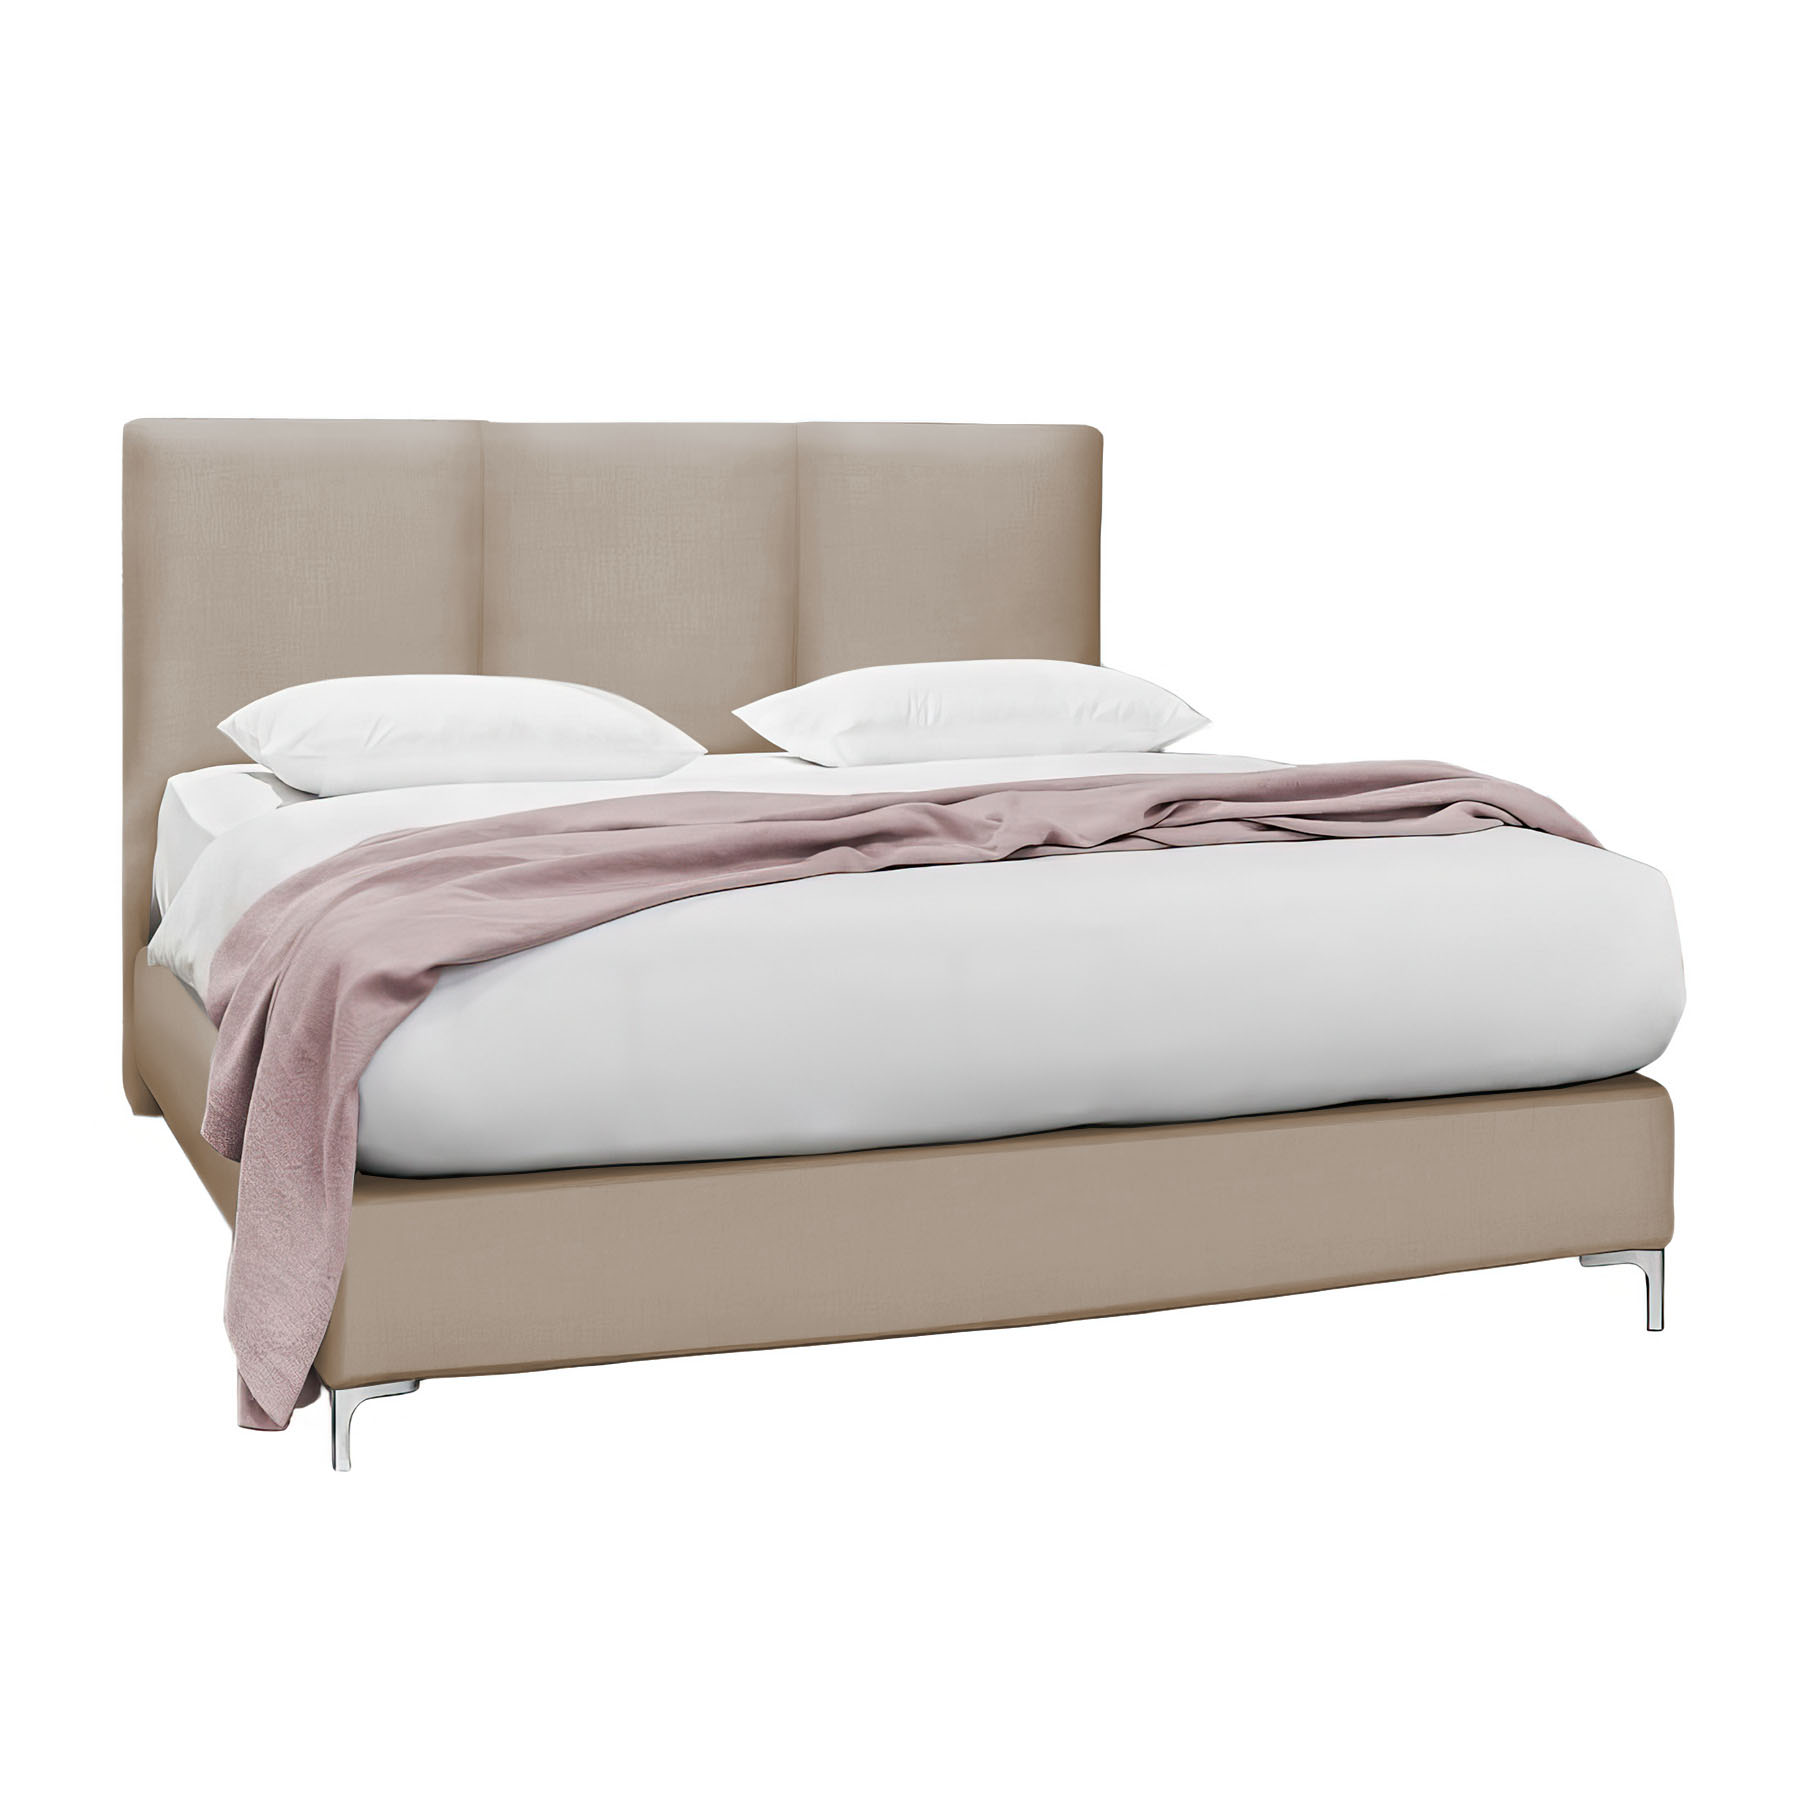 Boxspringbett Kate Select 160/220cm in Hot Madison Taupe